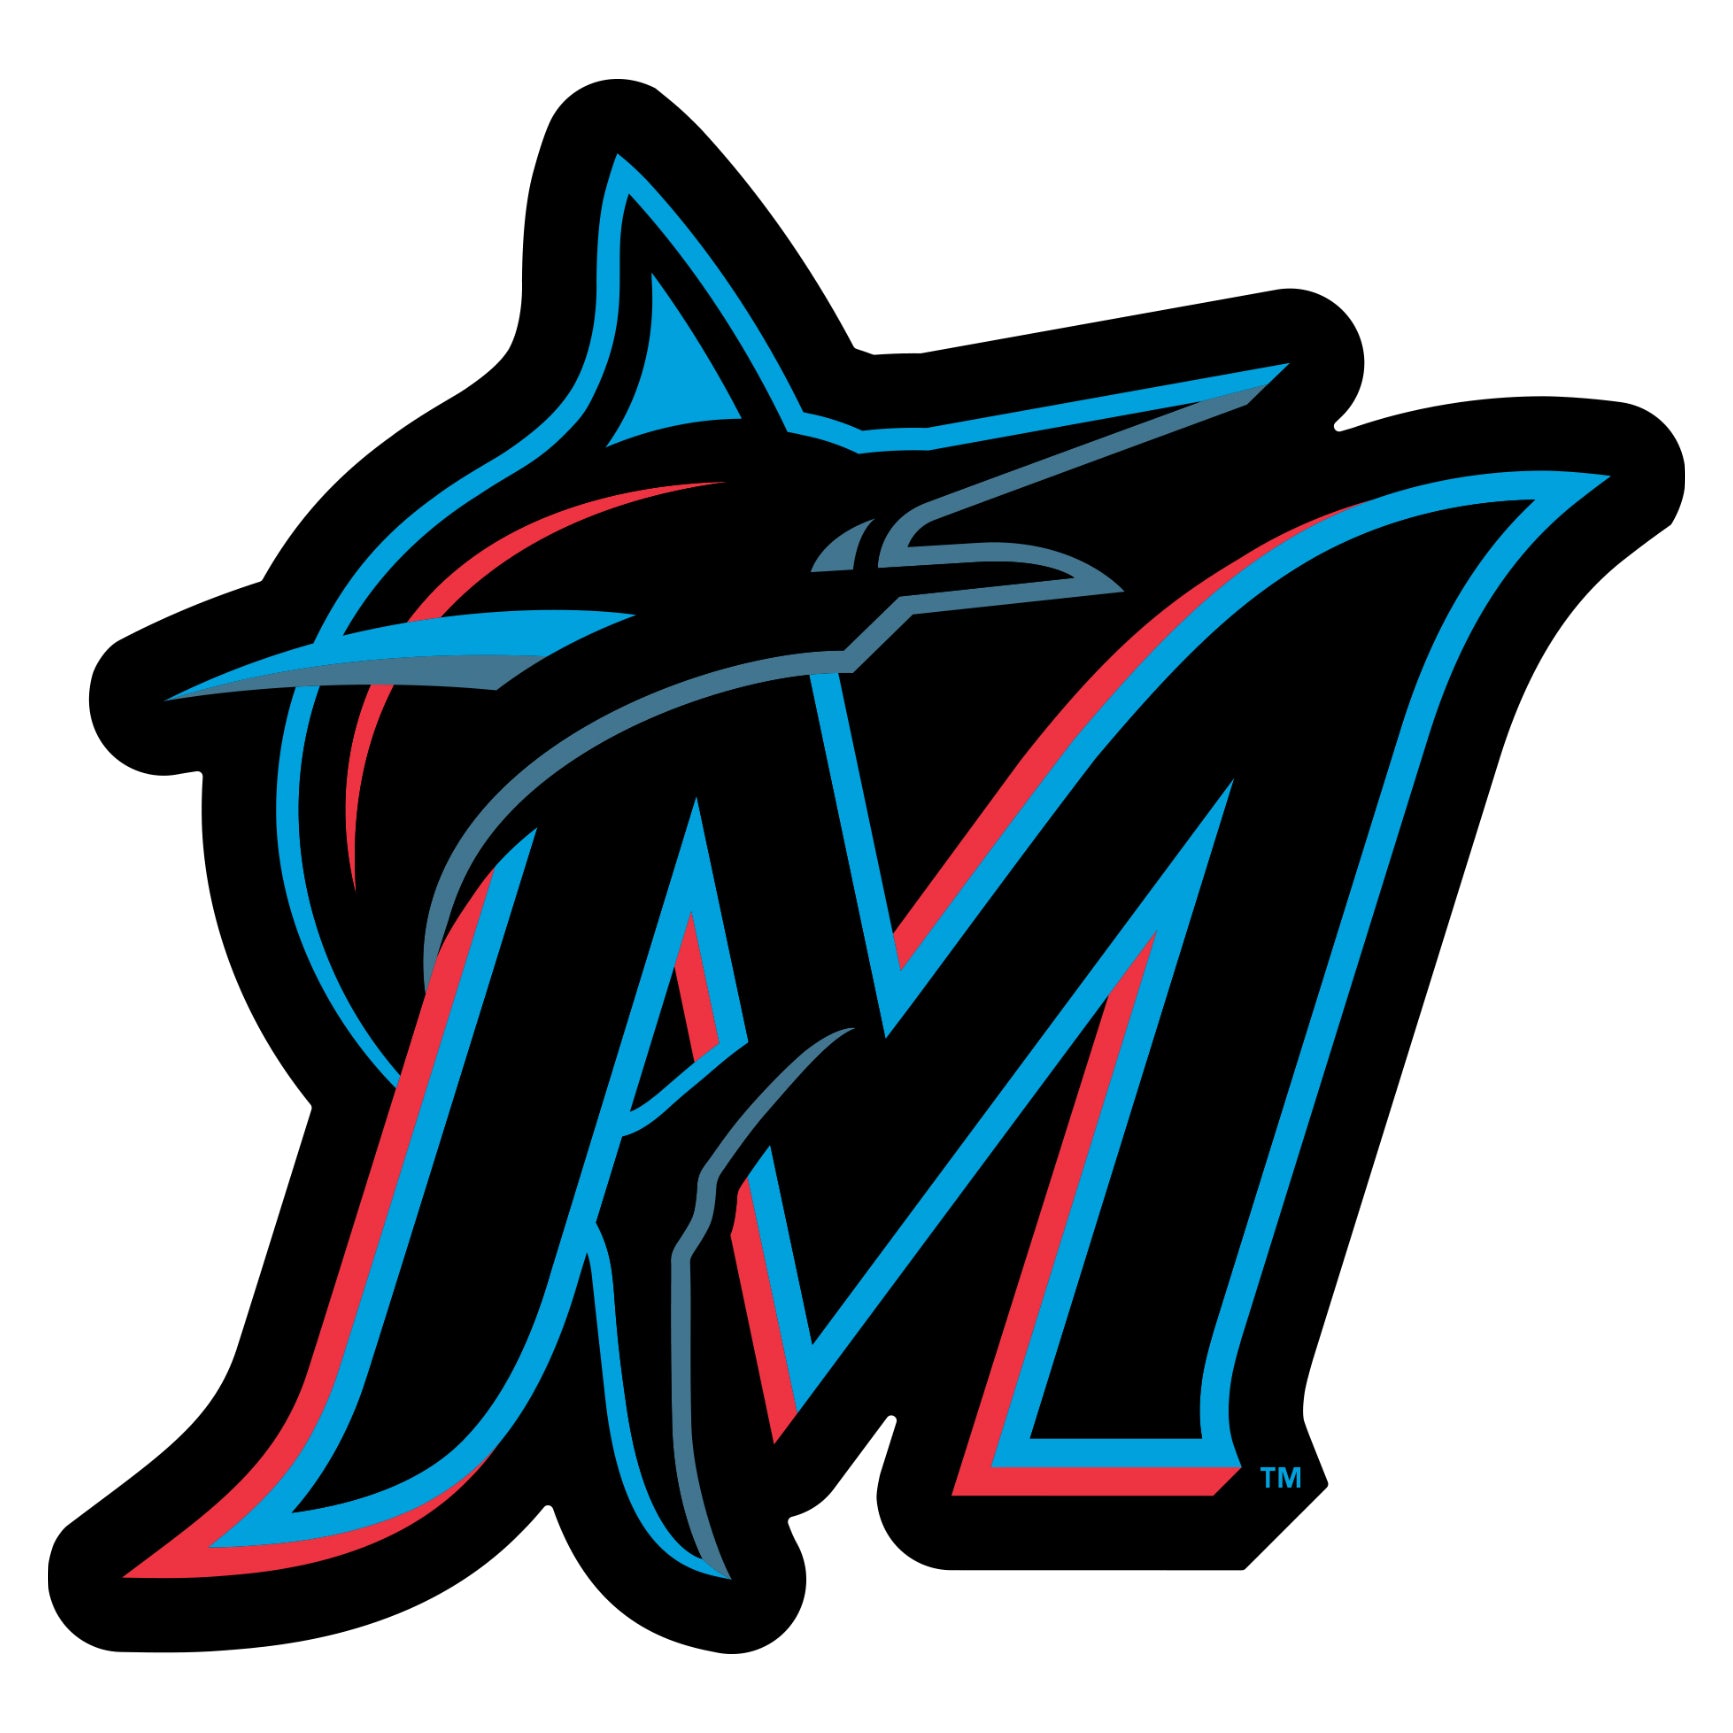 Miami Marlins: 2023 City Connect Logo - Officially Licensed MLB Removable  Adhesive Decal